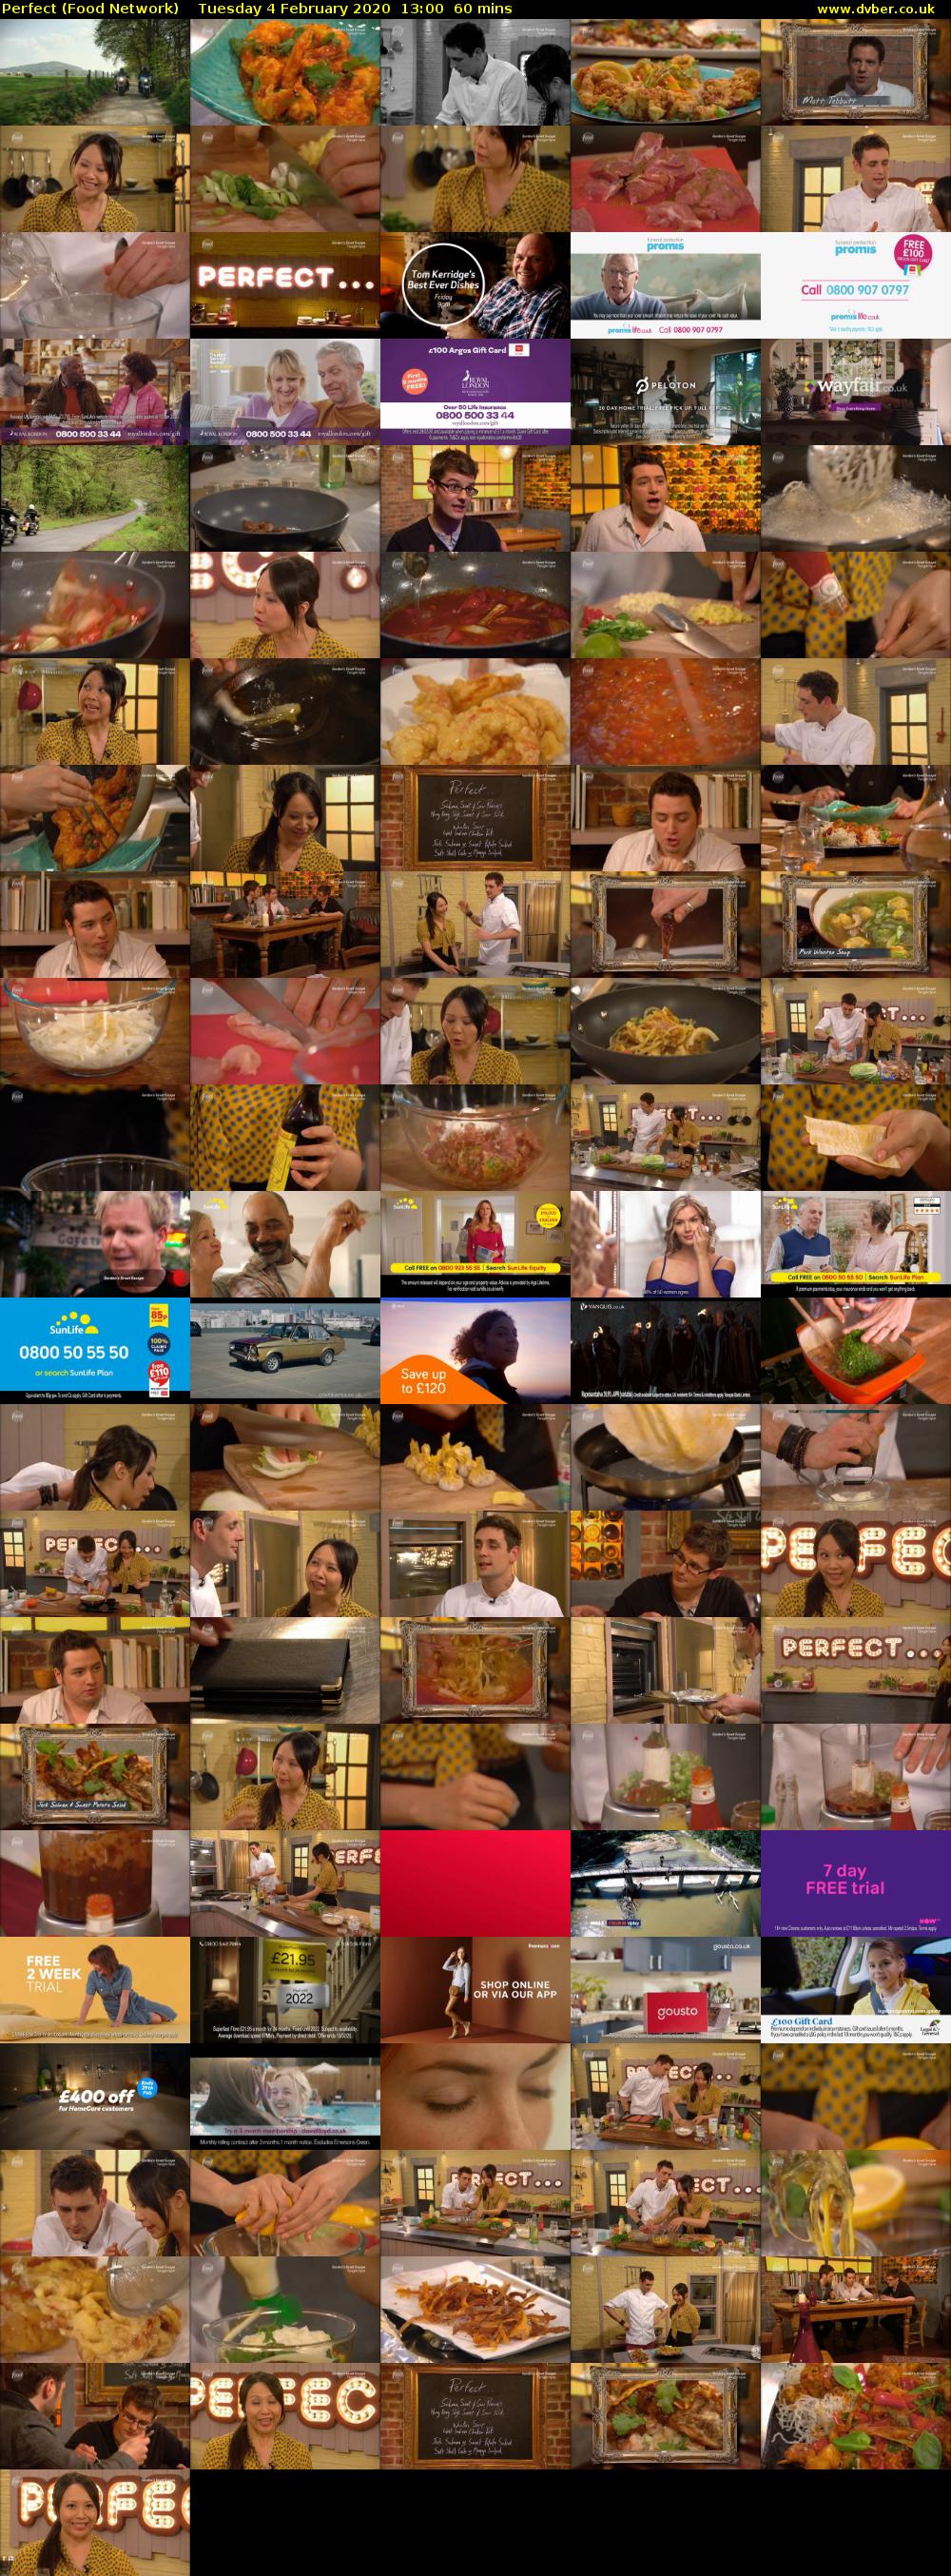 Perfect (Food Network) Tuesday 4 February 2020 13:00 - 14:00